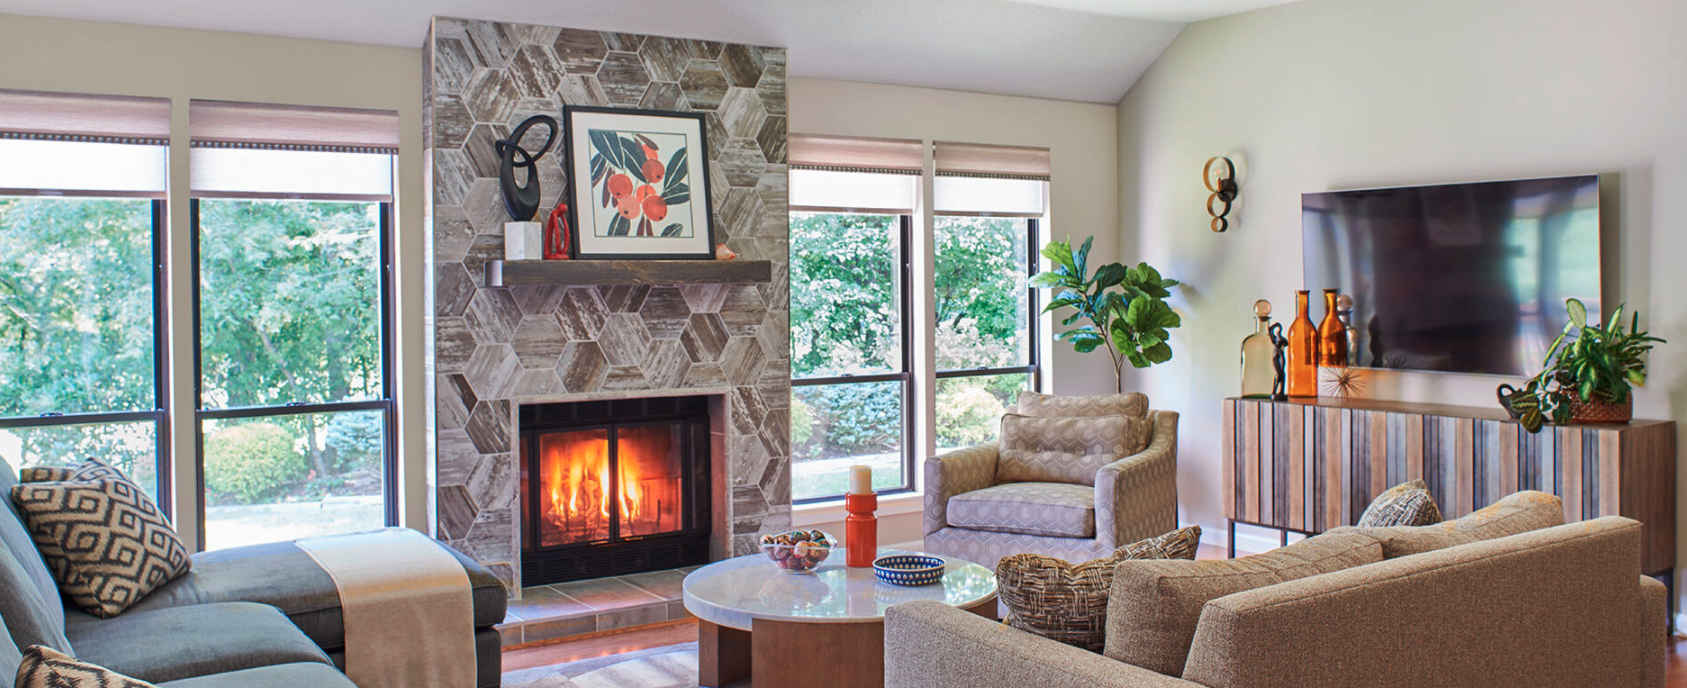 How to Decorate Around a Fireplace